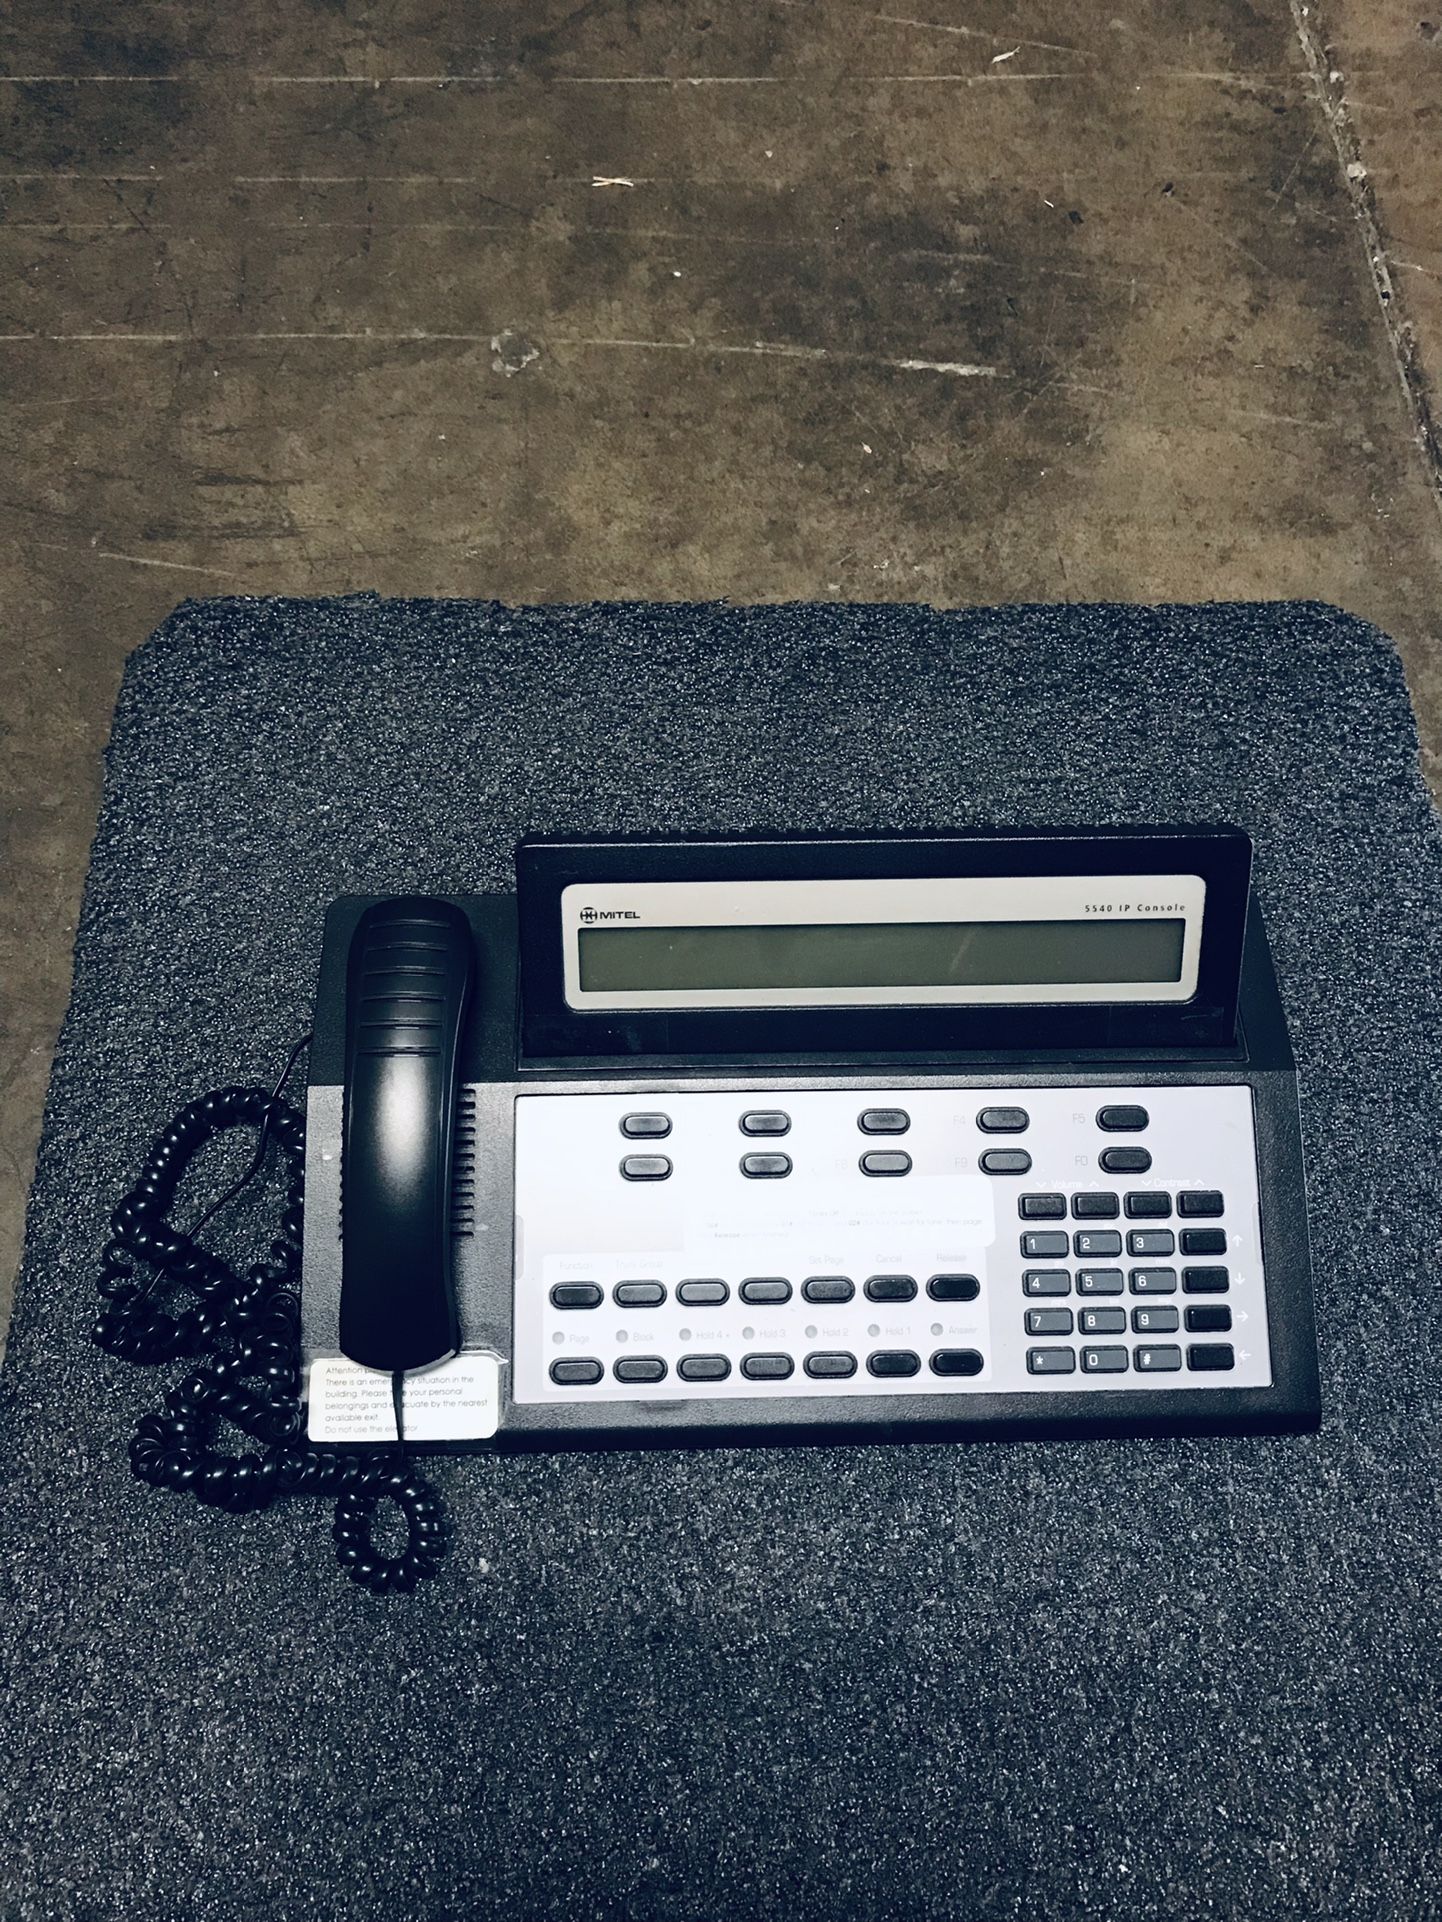 Mitel 5540 IP Console Phone System Part # (contact info removed)1 / Excellent Condition 